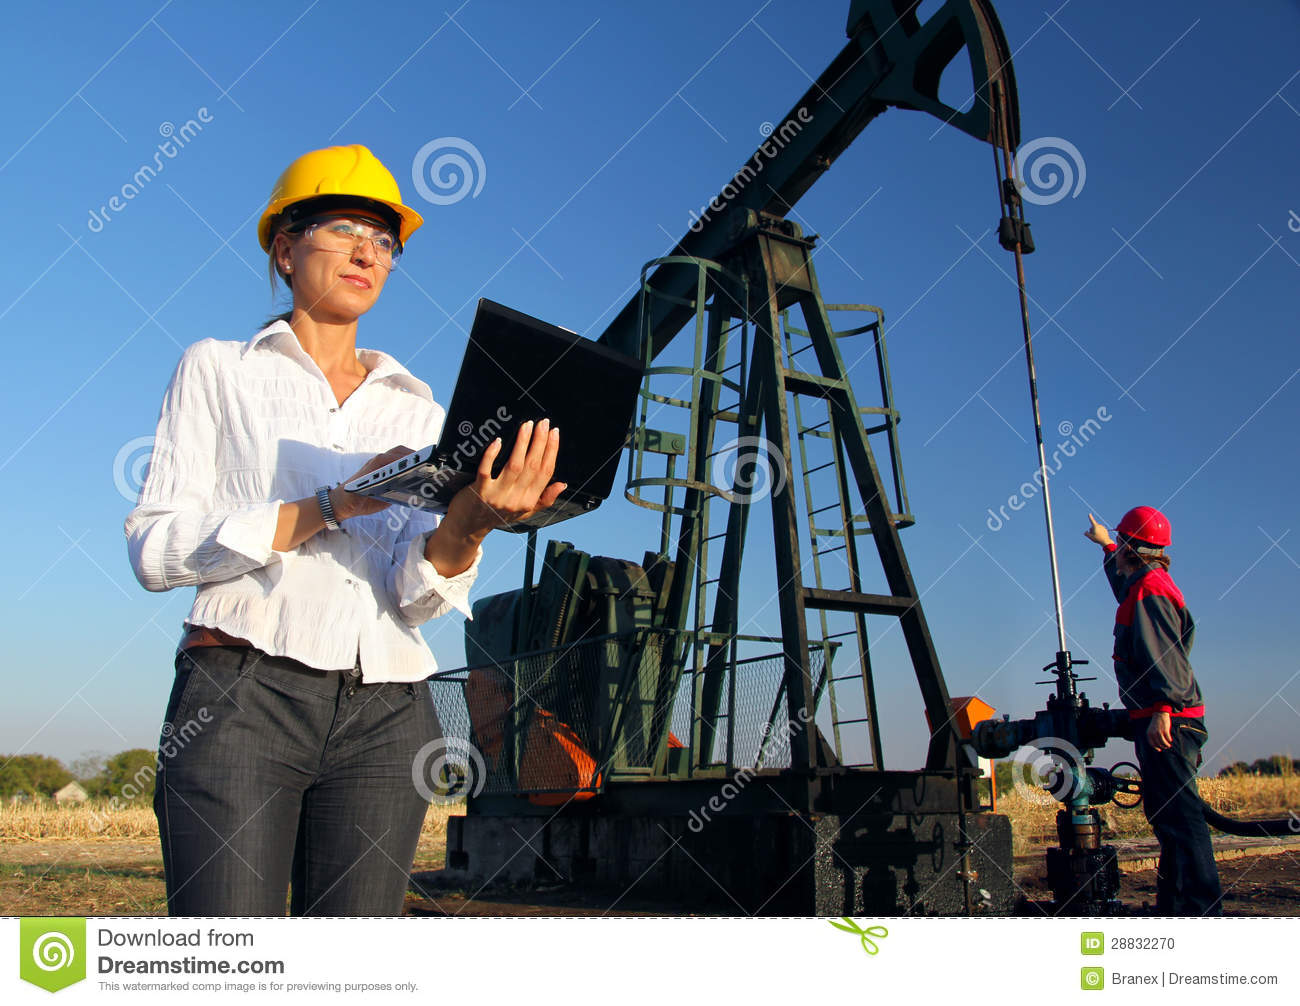 Female Engineer And Oil Men Working Together In An Oilfield Teamwork 